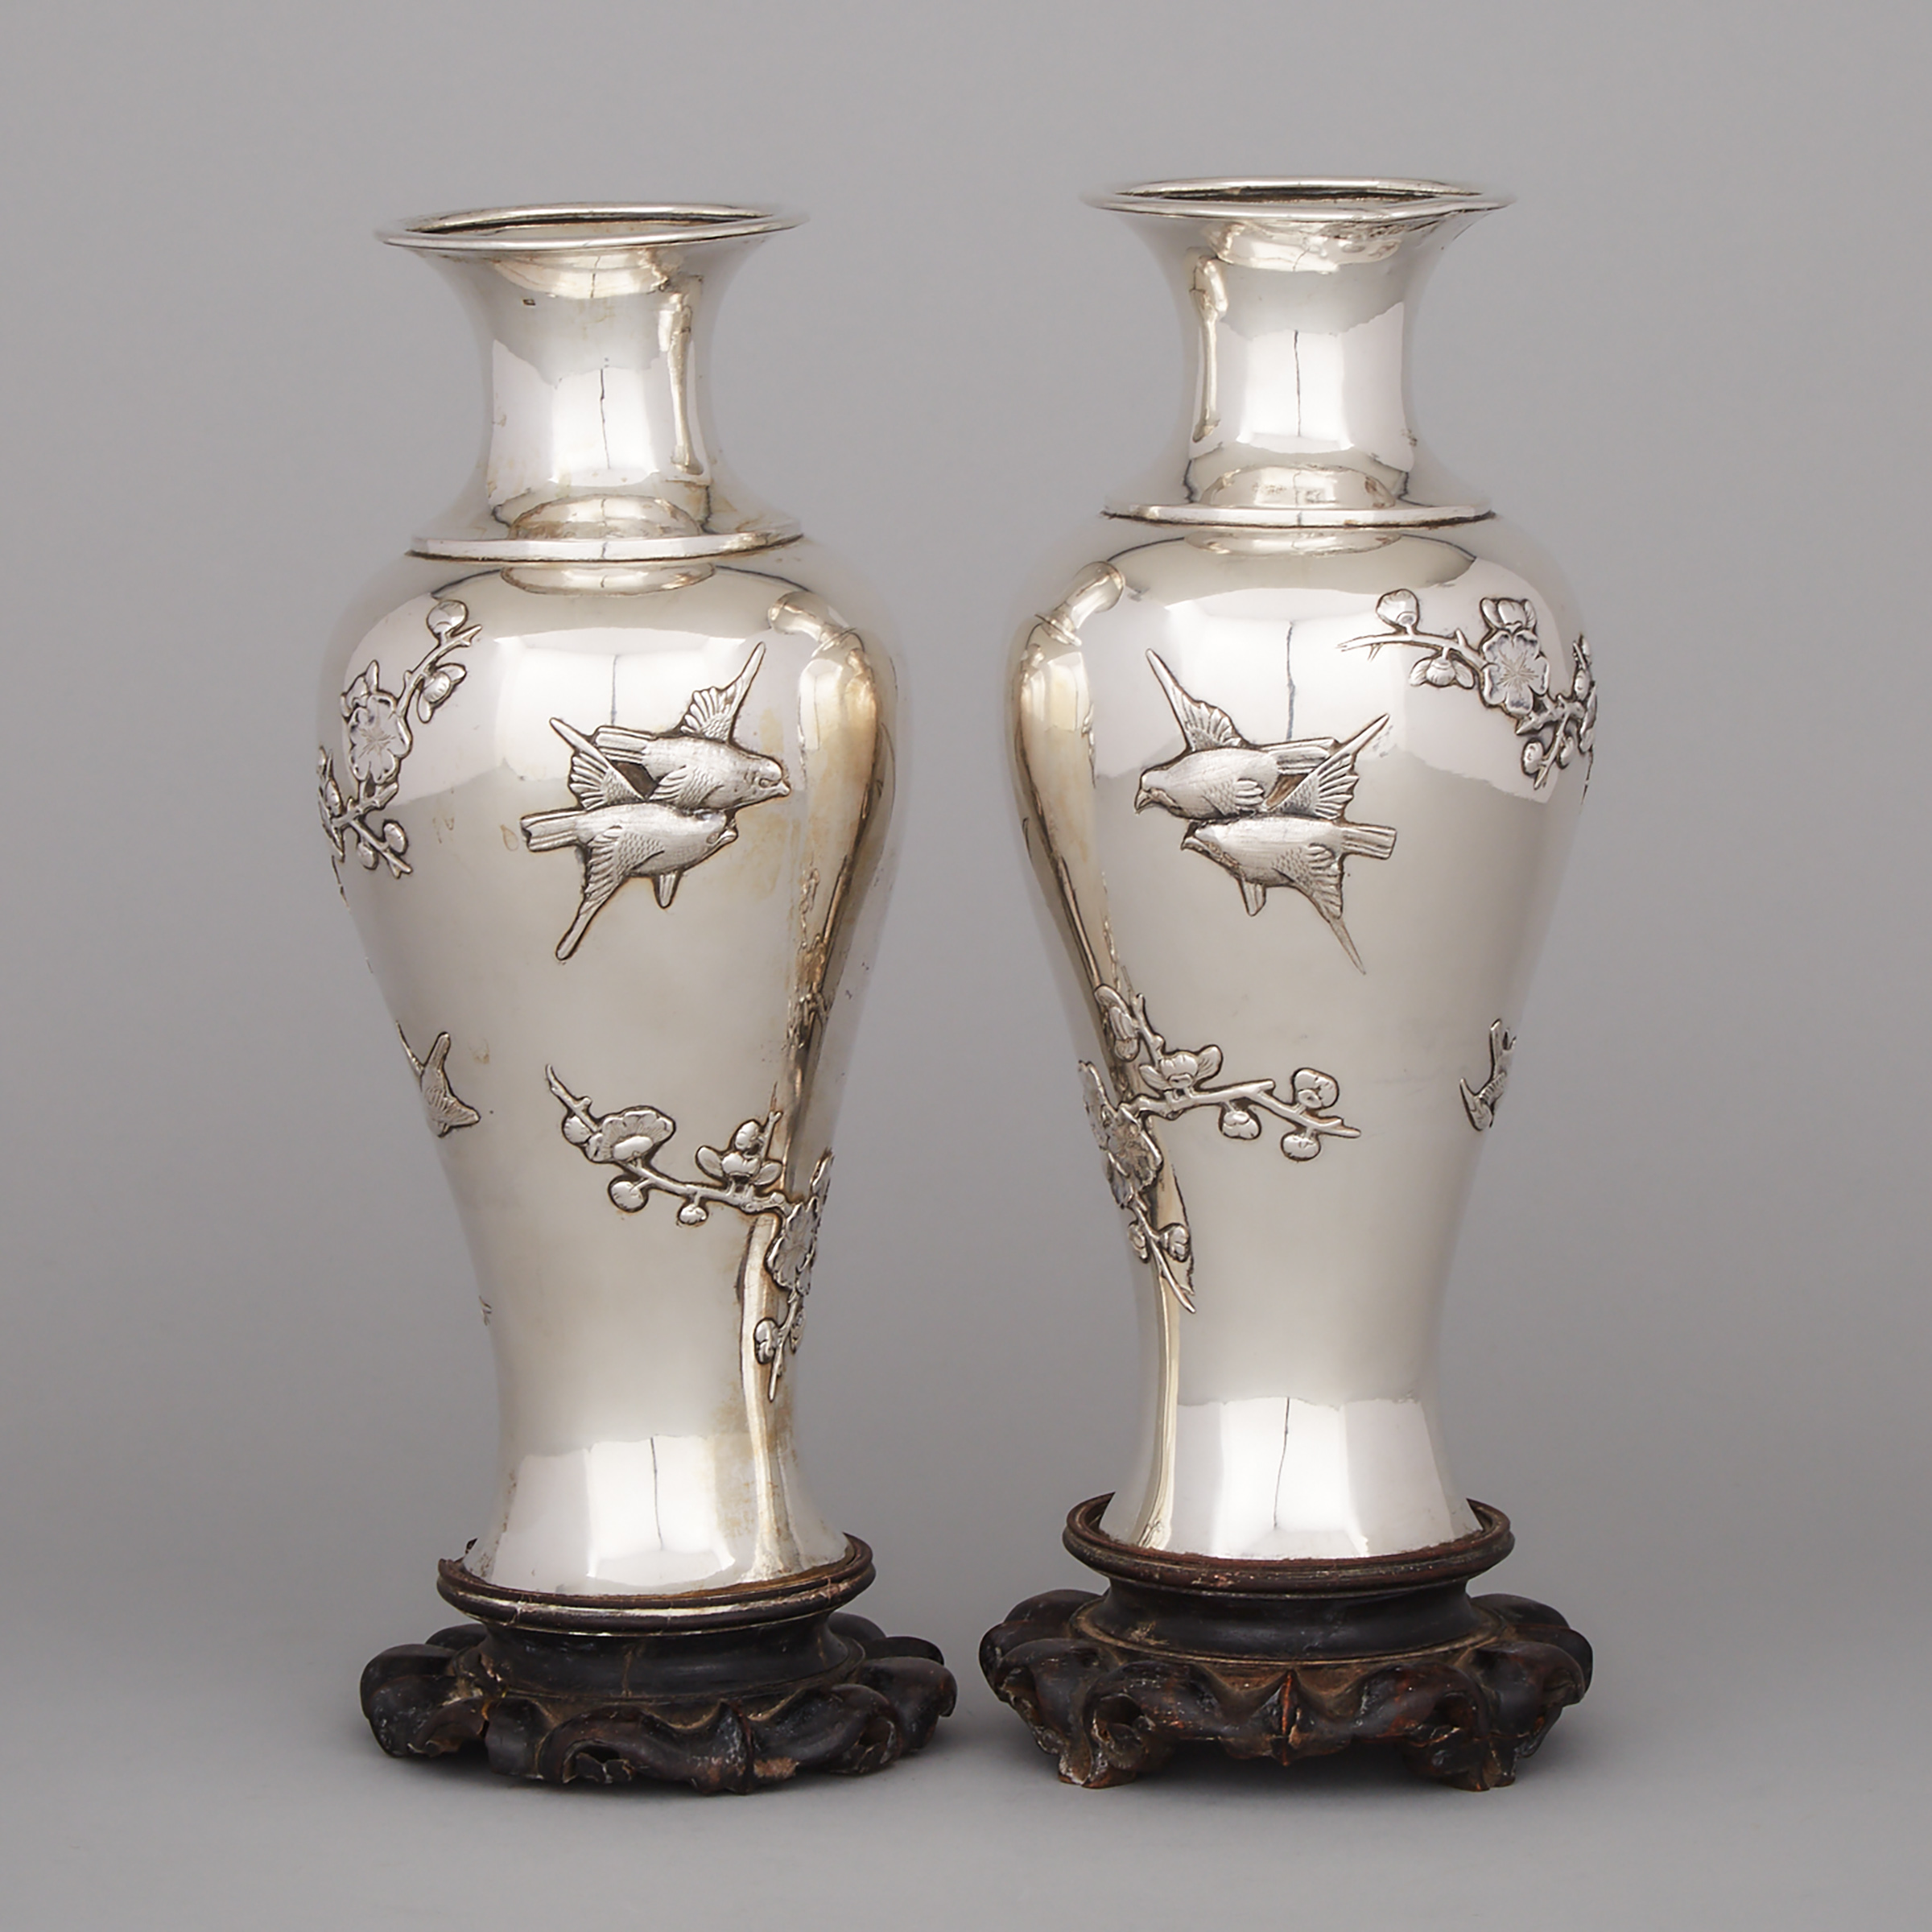 Pair of Chinese Export Silver Vases, Pao Kuang, Canton, late 19th/early 20th century